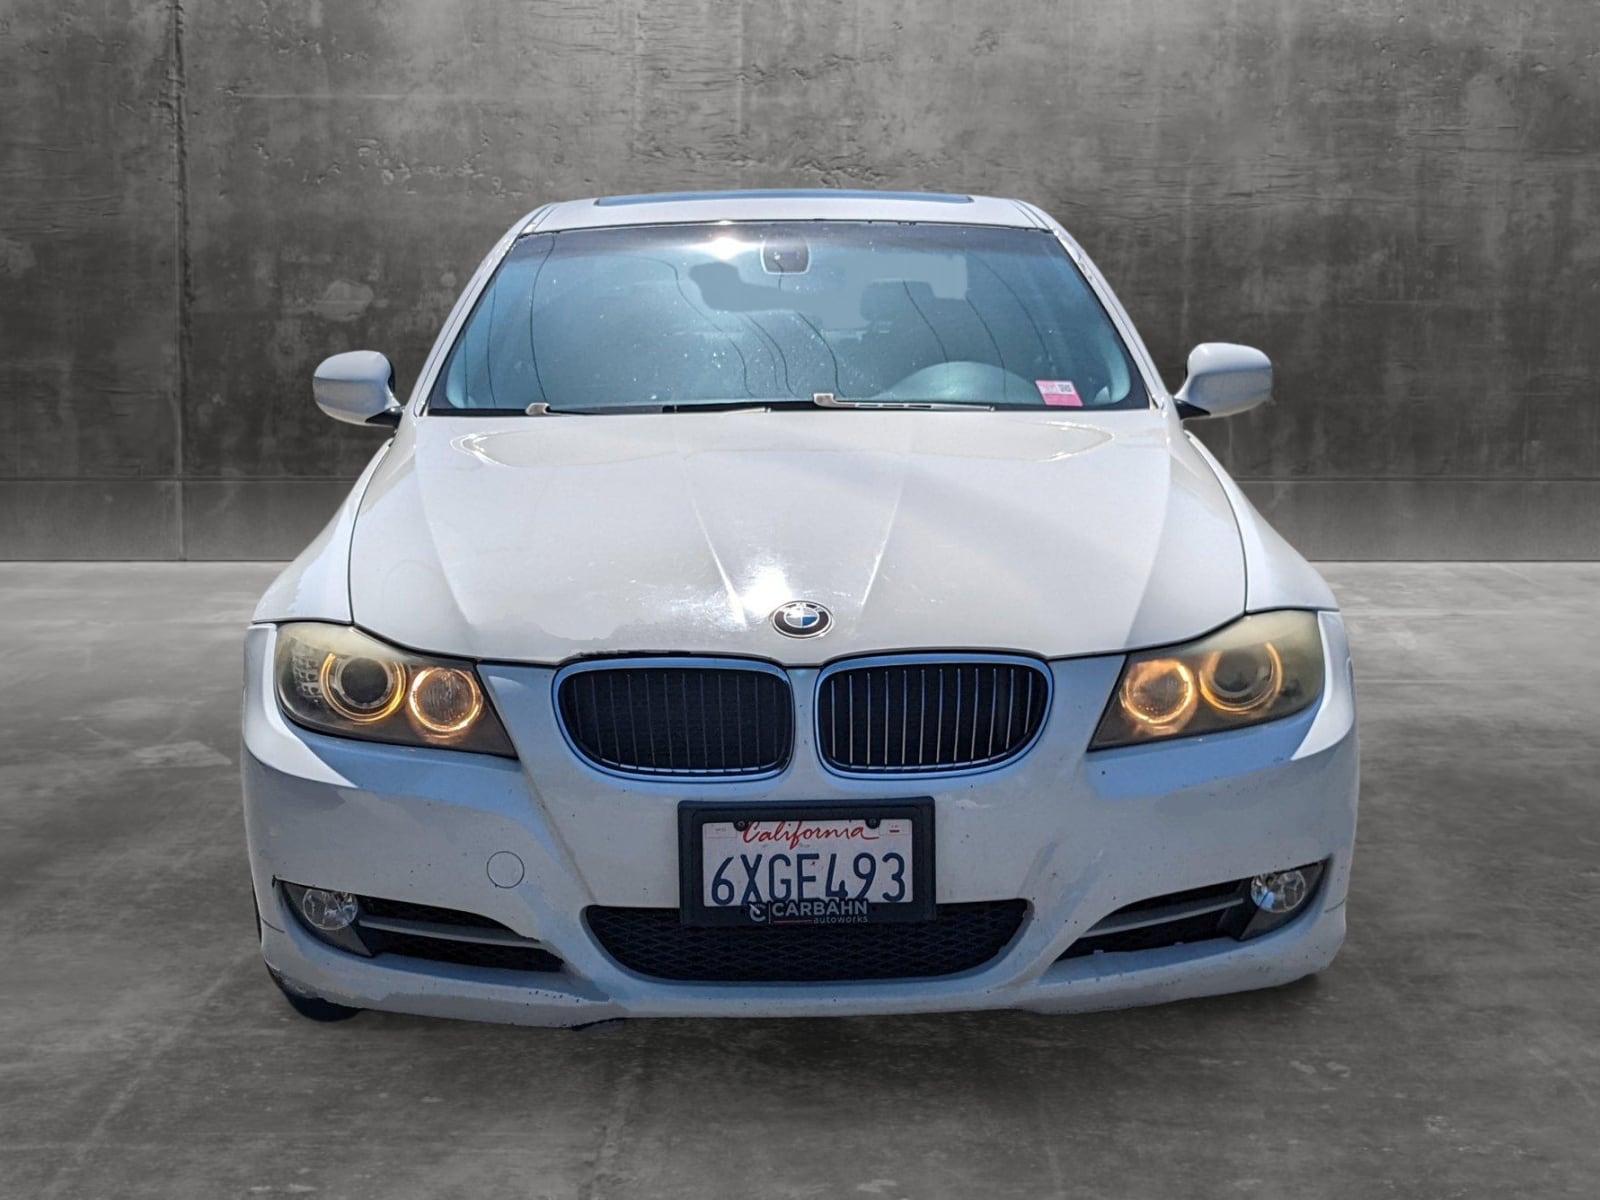 Used 2009 BMW 3 Series 335i with VIN WBAPM77589NL87455 for sale in Mountain View, CA